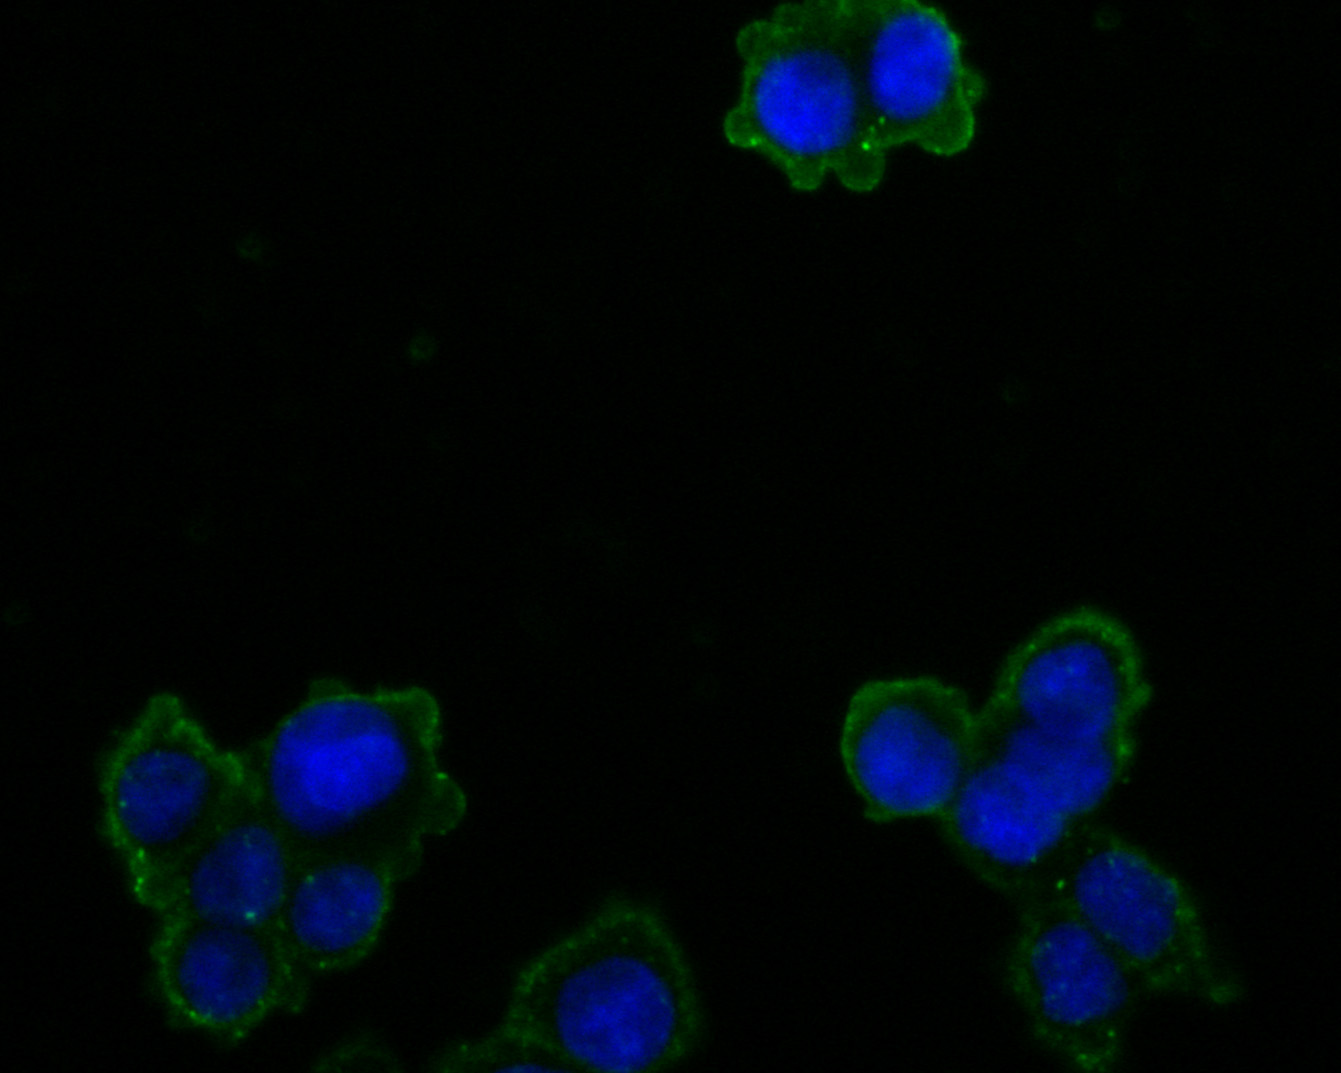 ICC staining of OTC/Ornithine Carbamoyltransferase in SW480 cells (green). Formalin fixed cells were permeabilized with 0.1% Triton X-100 in TBS for 10 minutes at room temperature and blocked with 1% Blocker BSA for 15 minutes at room temperature. Cells were probed with the primary antibody (HA500048, 1/100) for 1 hour at room temperature, washed with PBS. Alexa Fluor®488 Goat anti-Rabbit IgG was used as the secondary antibody at 1/1,000 dilution. The nuclear counter stain is DAPI (blue).